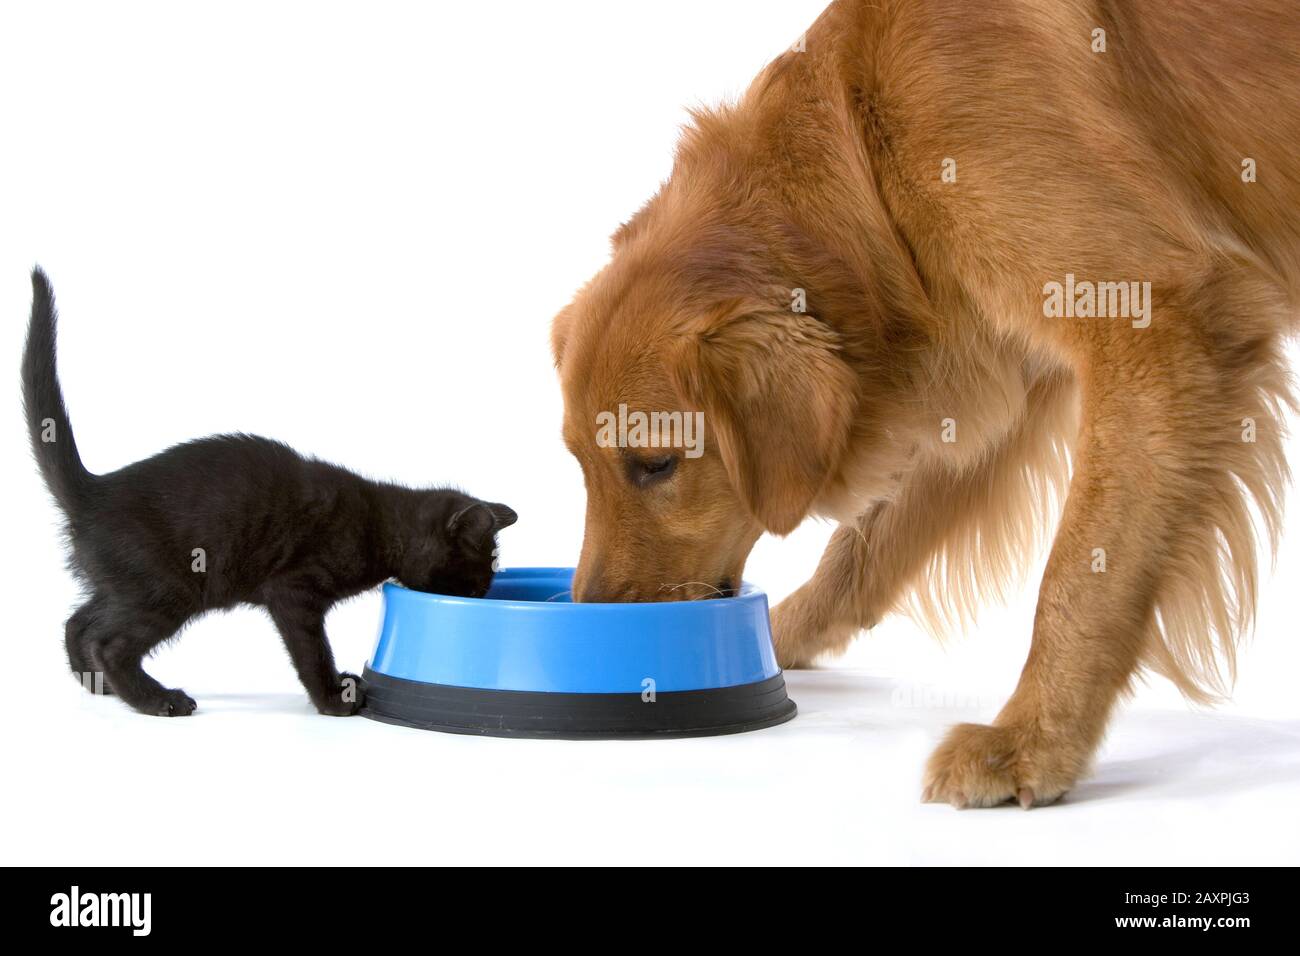 Kitten and Golden Retriever dog share a bowl of food on a white background Stock Photo